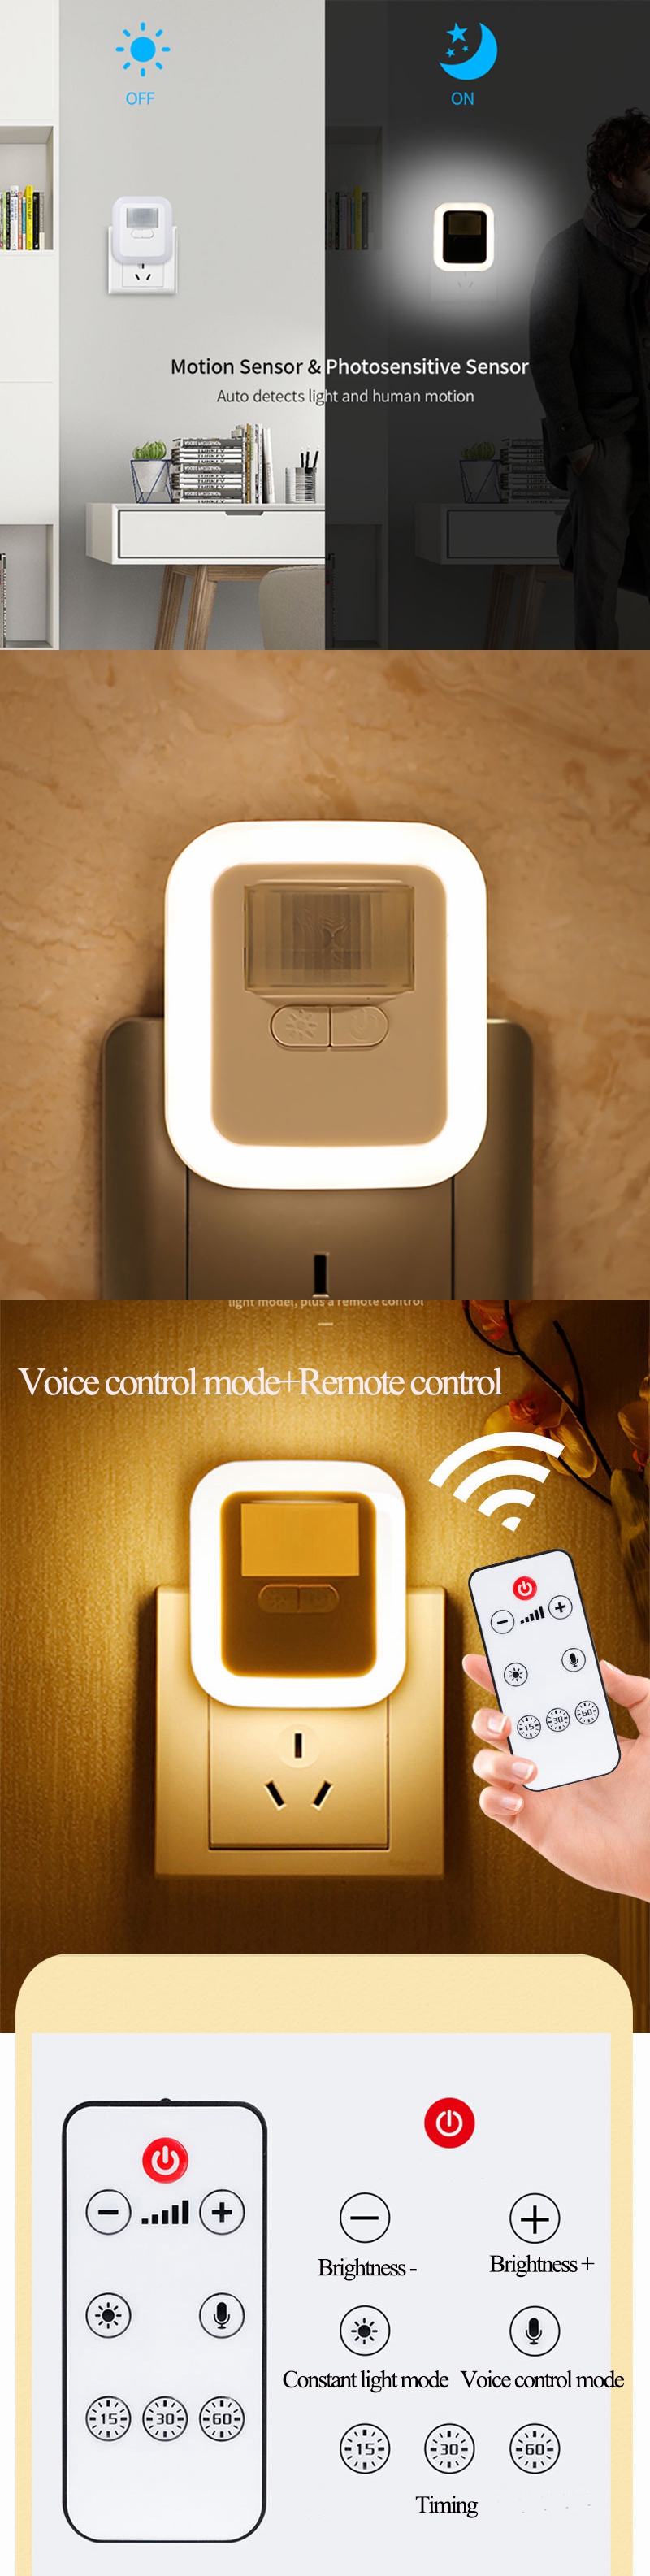 24W-Light-Control-10-Gears-Dimming-Delay-Human-Body-Intelligent-Induction-Sound-and-Light-Remote-Con-1795905-1